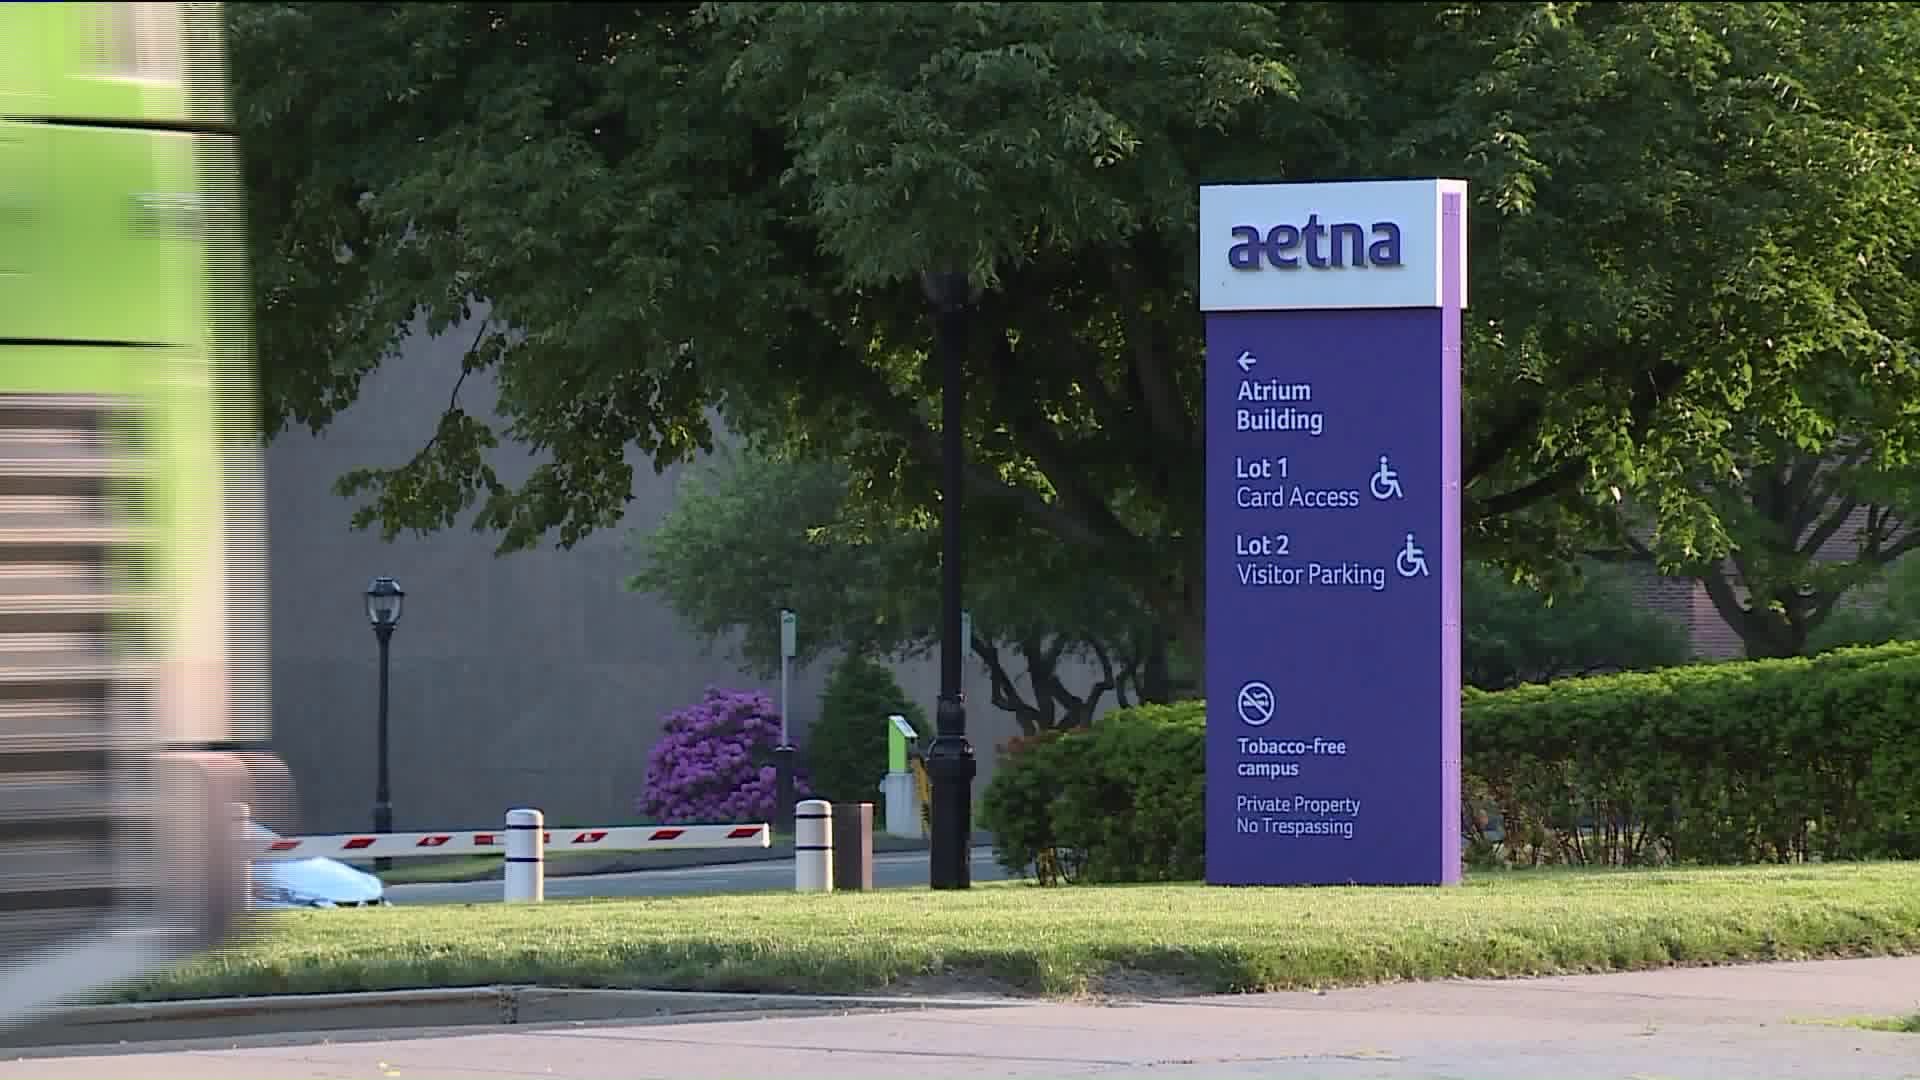 Aetna confirms negotiations to relocate from Hartford; Bronin, Malloy respond